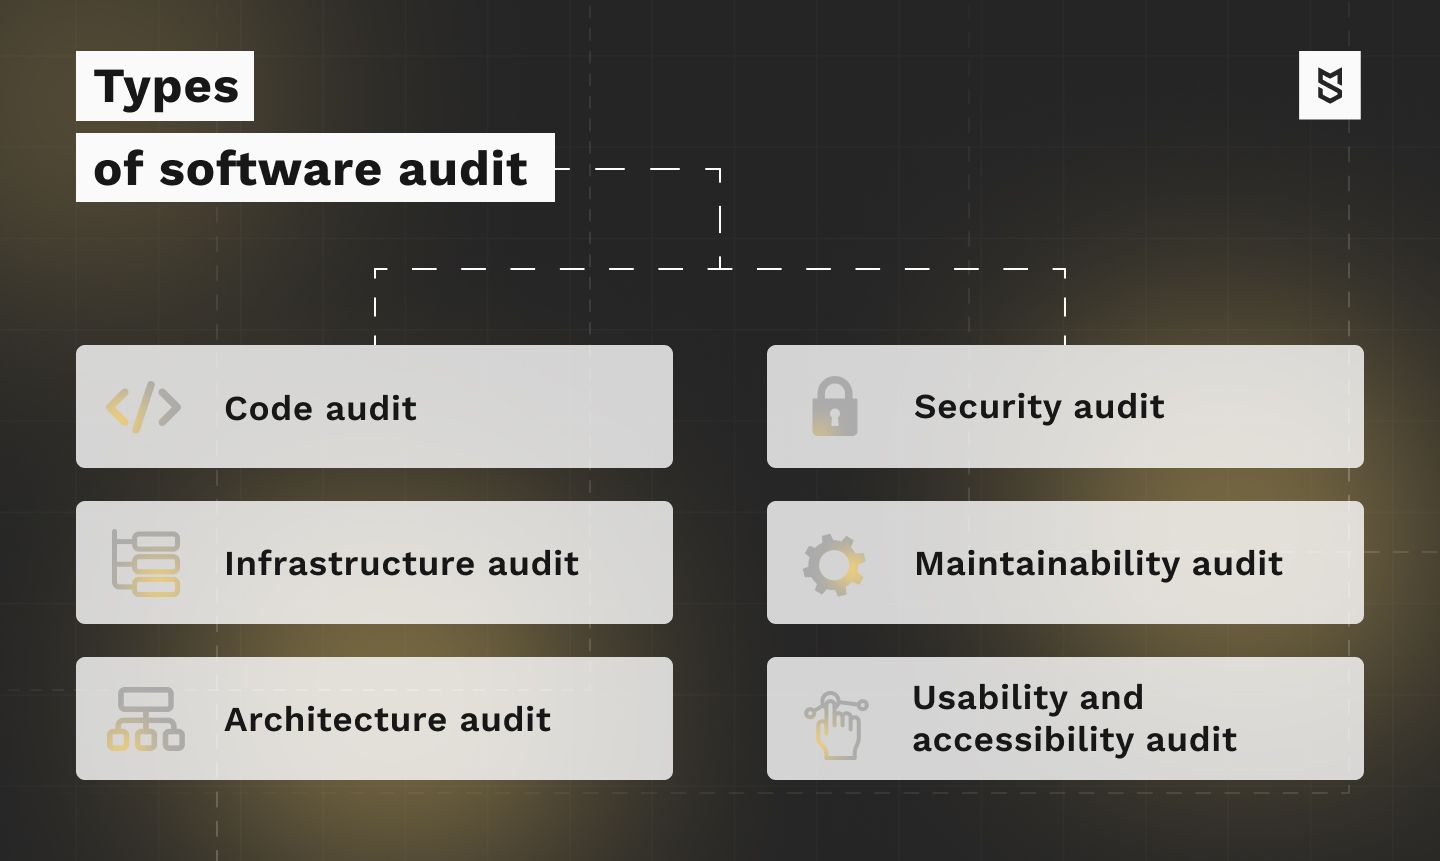 Types of software audit